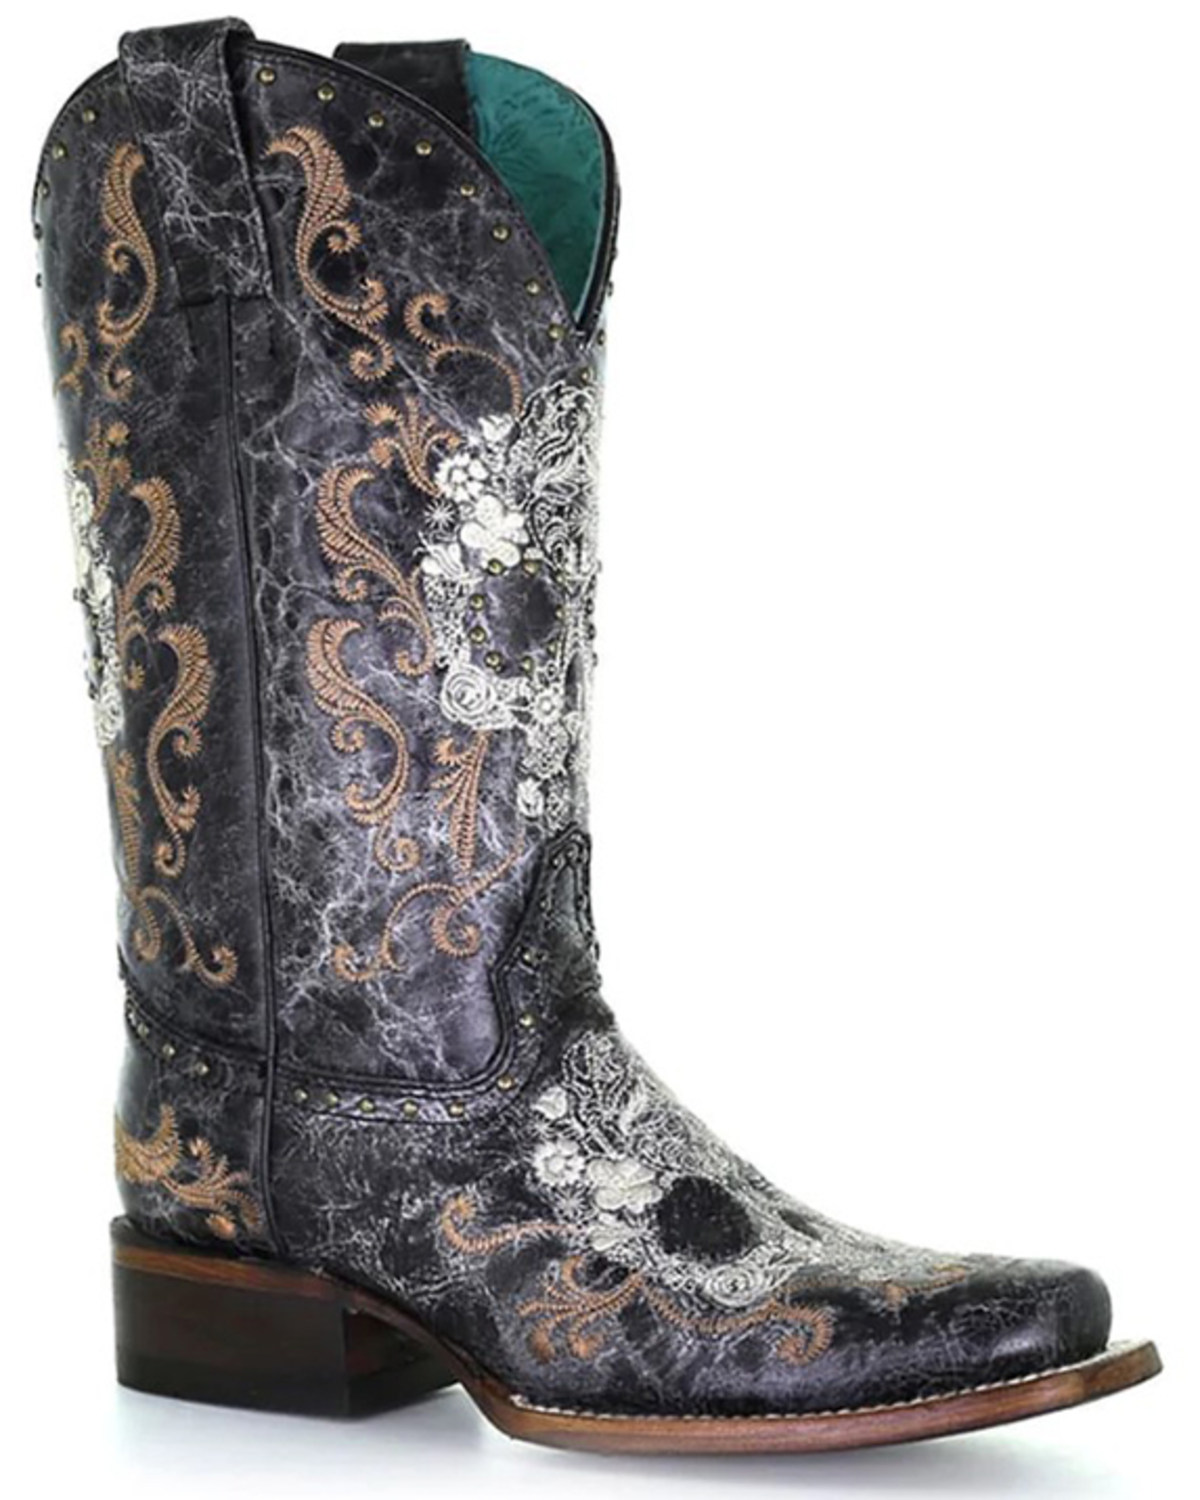 Corral Women's Floral Skull Embroidery & Studs Western Boots - Square Toe